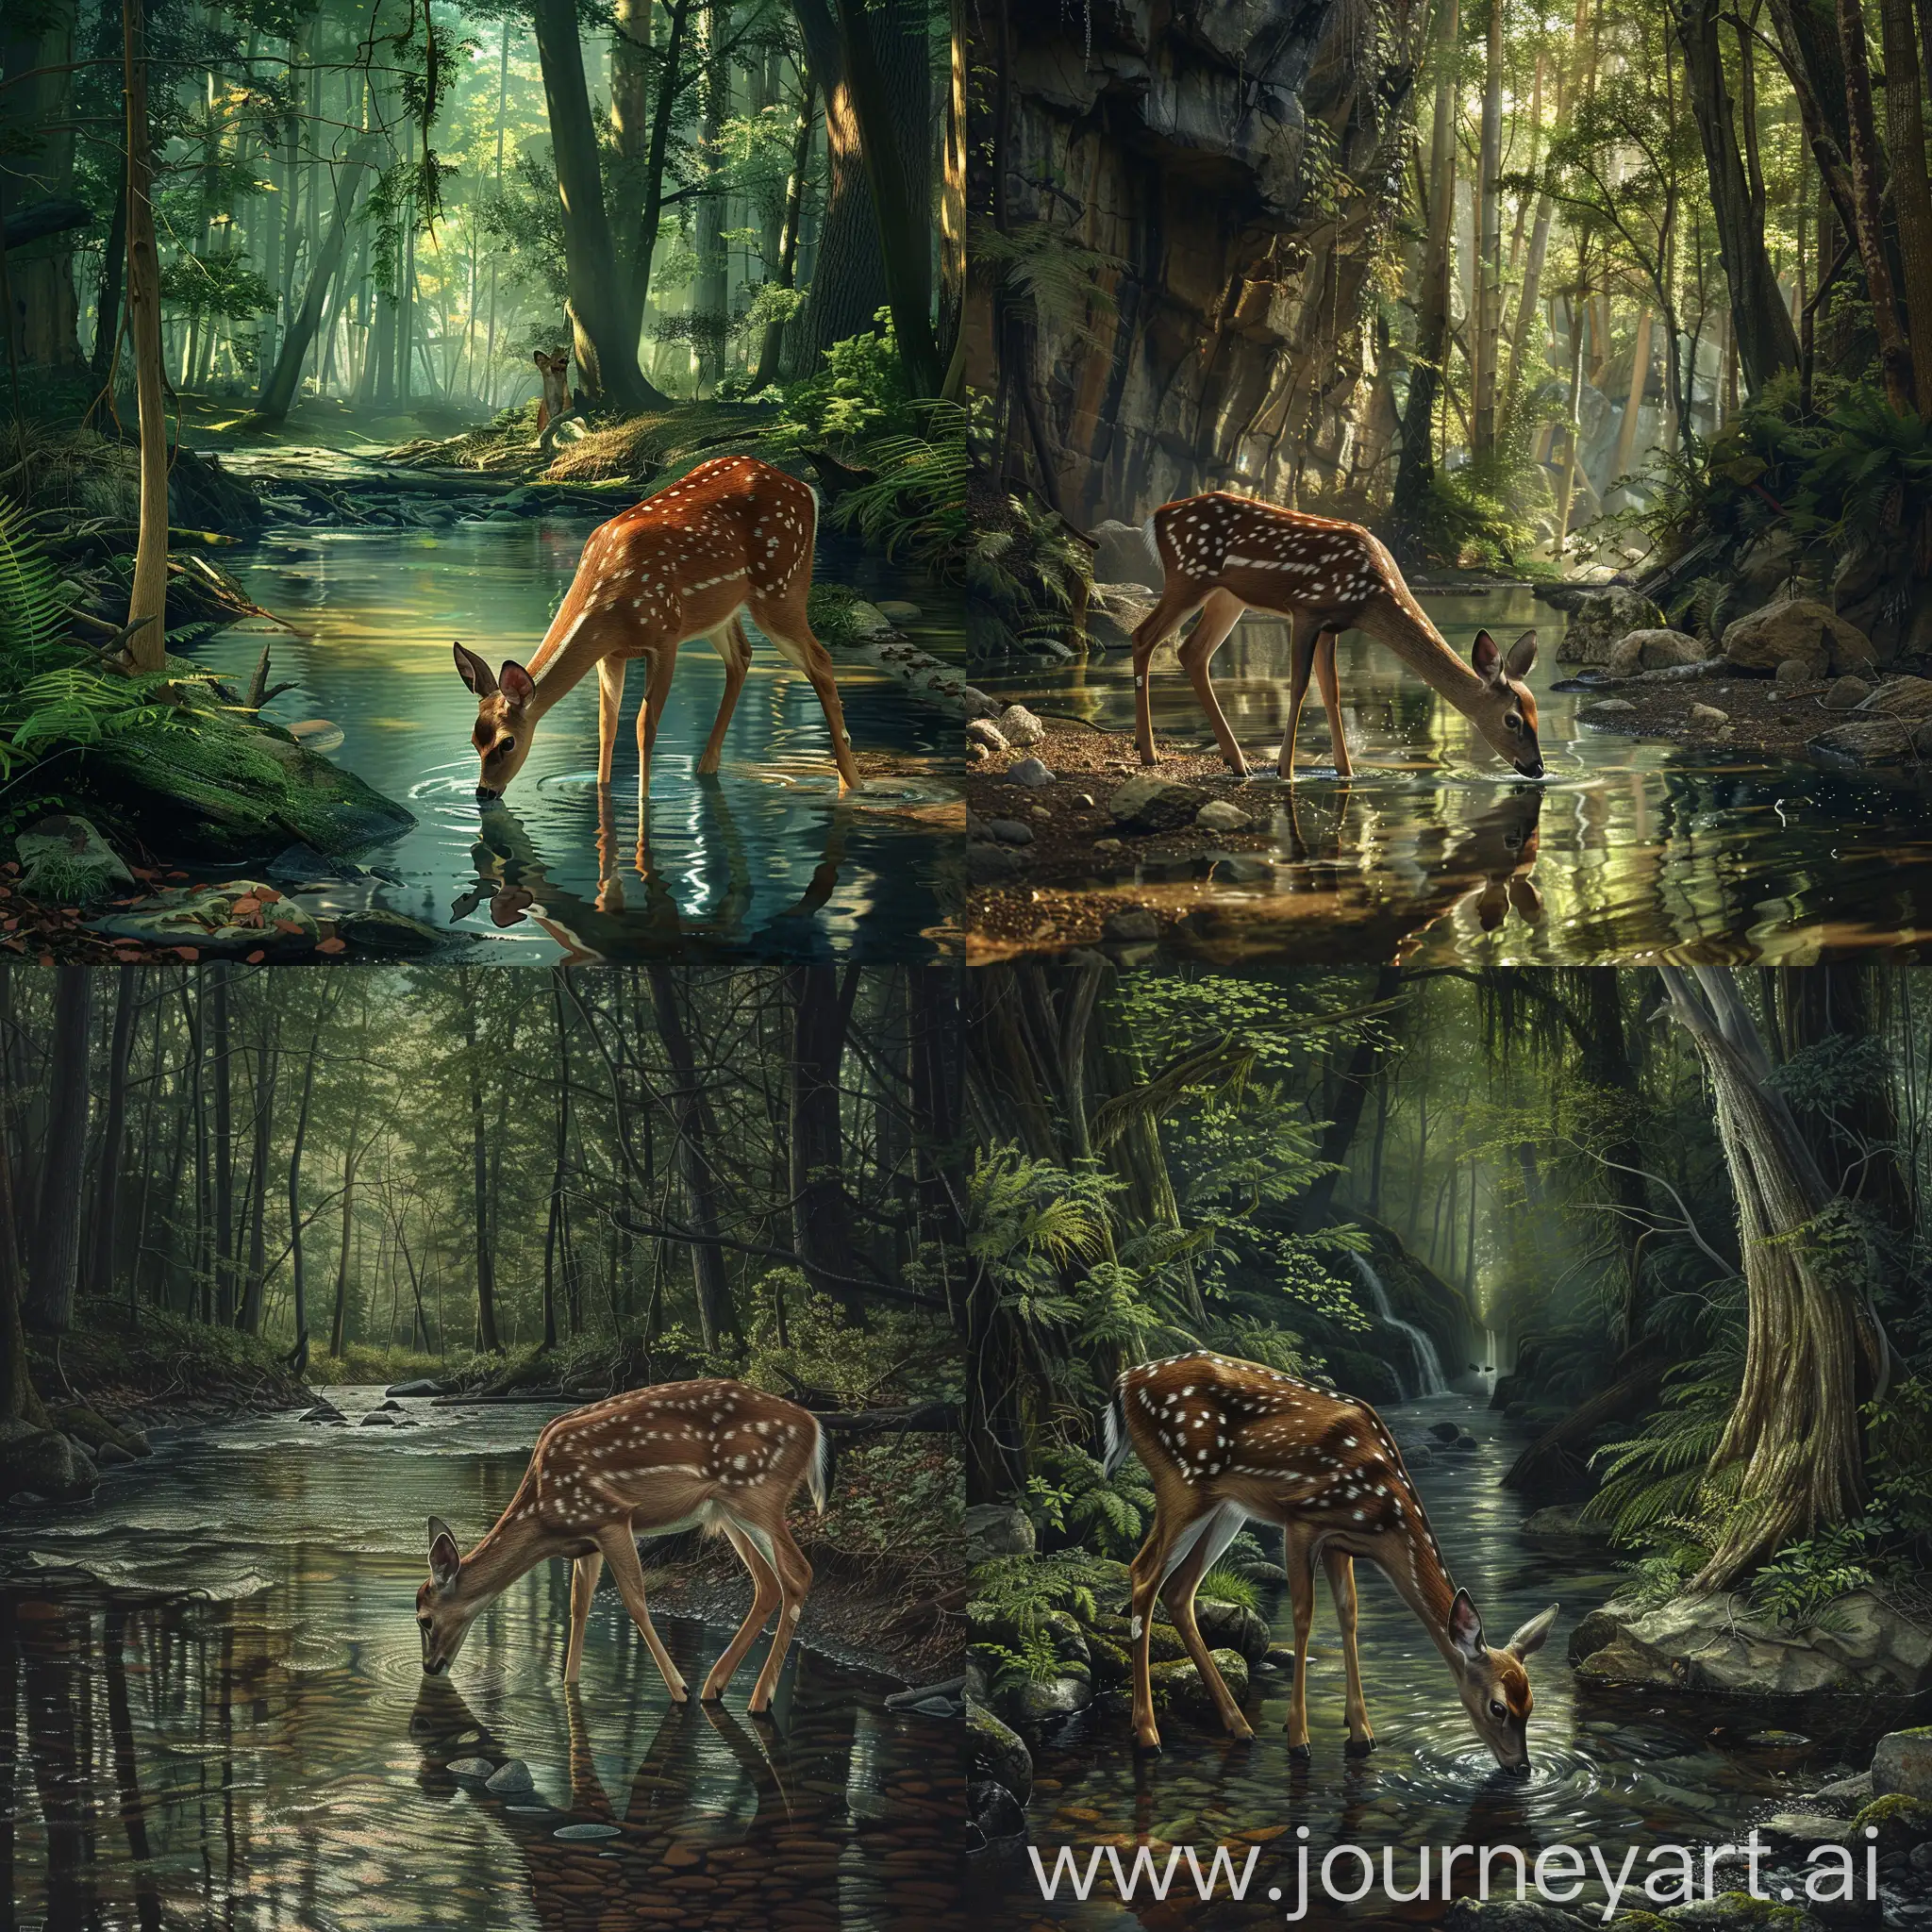 Serene-Deer-Drinking-Water-in-Enchanting-Forest-River